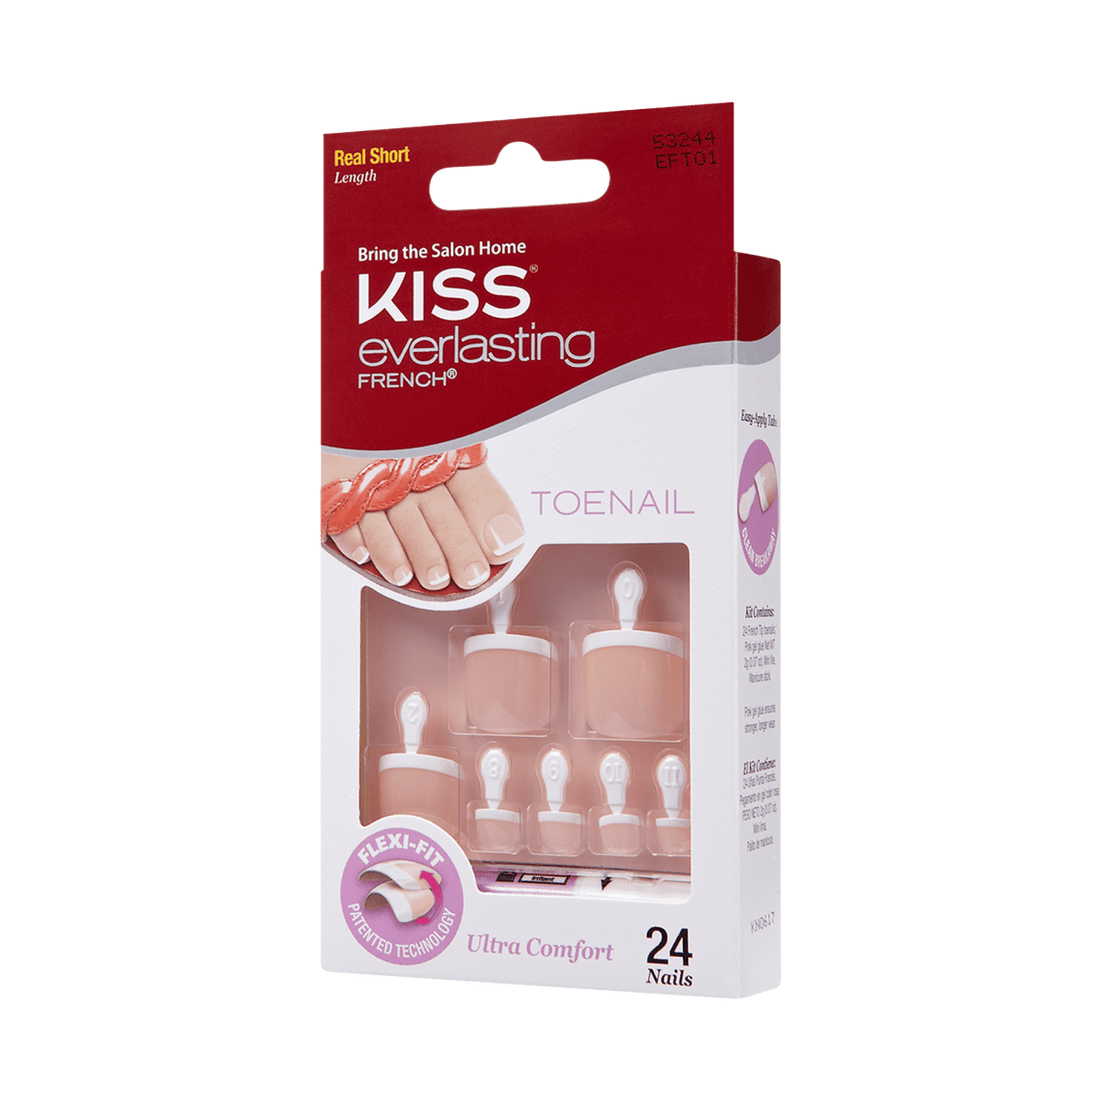 KISS Everlasting, Press-On Nails, Limitless, Beige, Short Squoval, 24ct